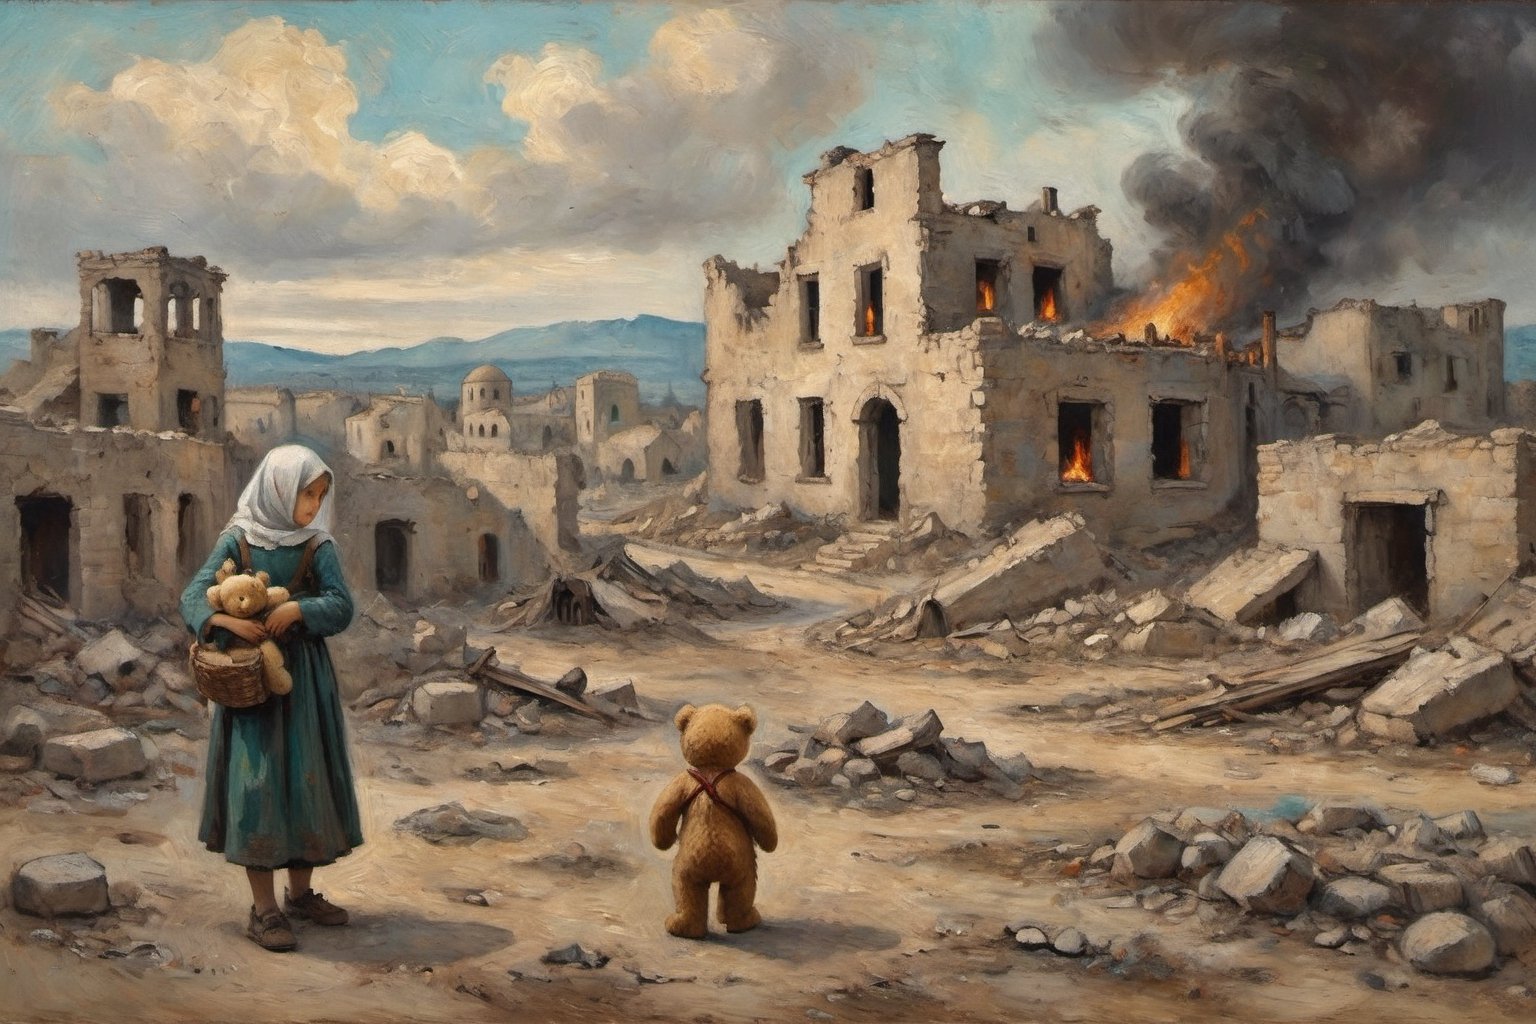 Oil painting. War in Palestine. A little crying girl with a teddy bear stands near the ruins of her house. Rubble, dust, dust, smoke, fire [style: Vincent van Gogh and Leonardo da Vinci]
